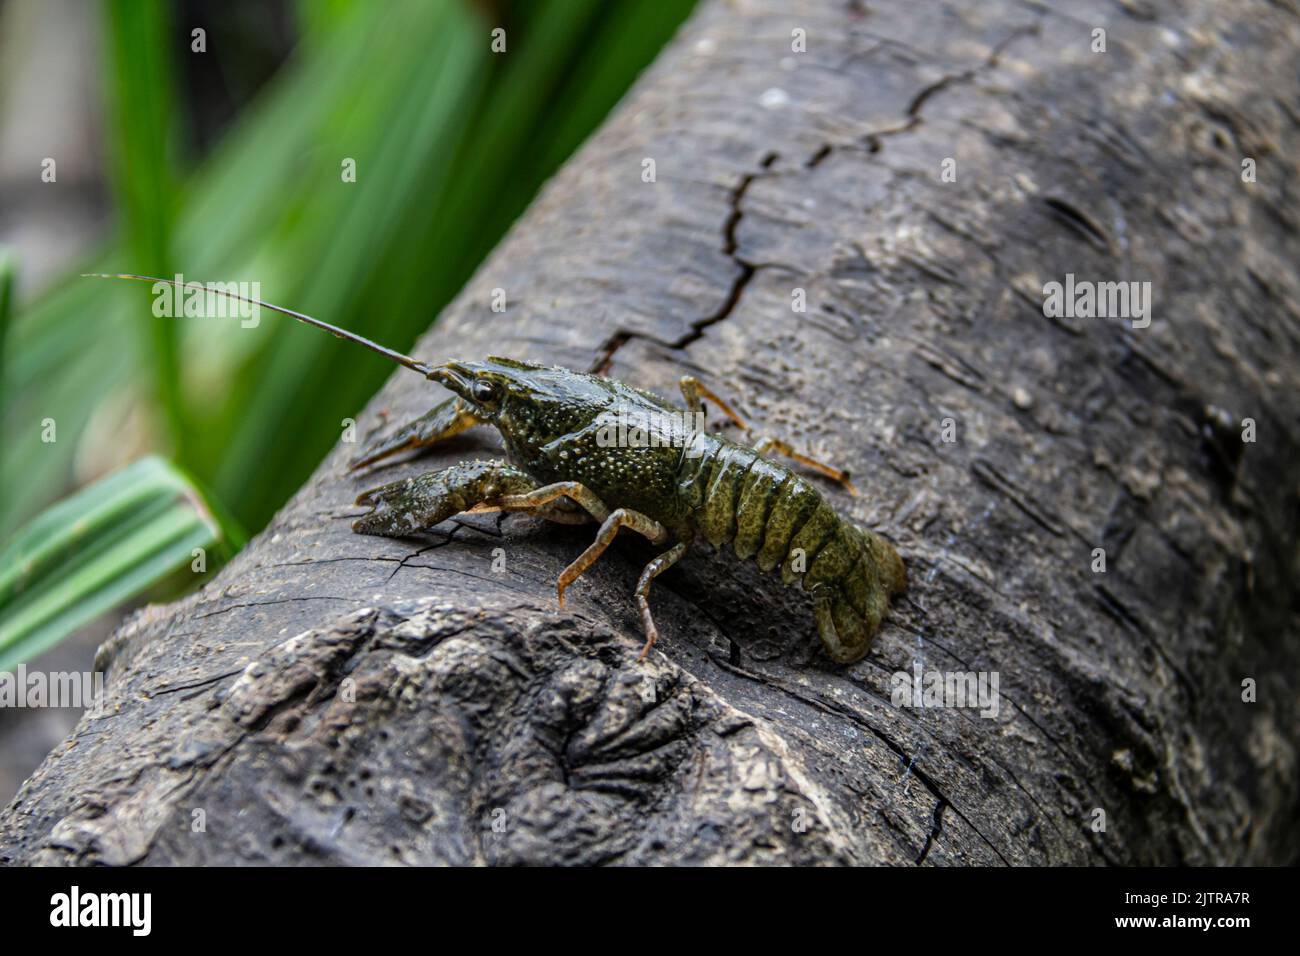 The small crayfish move on  the tree against background. Crayfish on the fallen wood Stock Photo